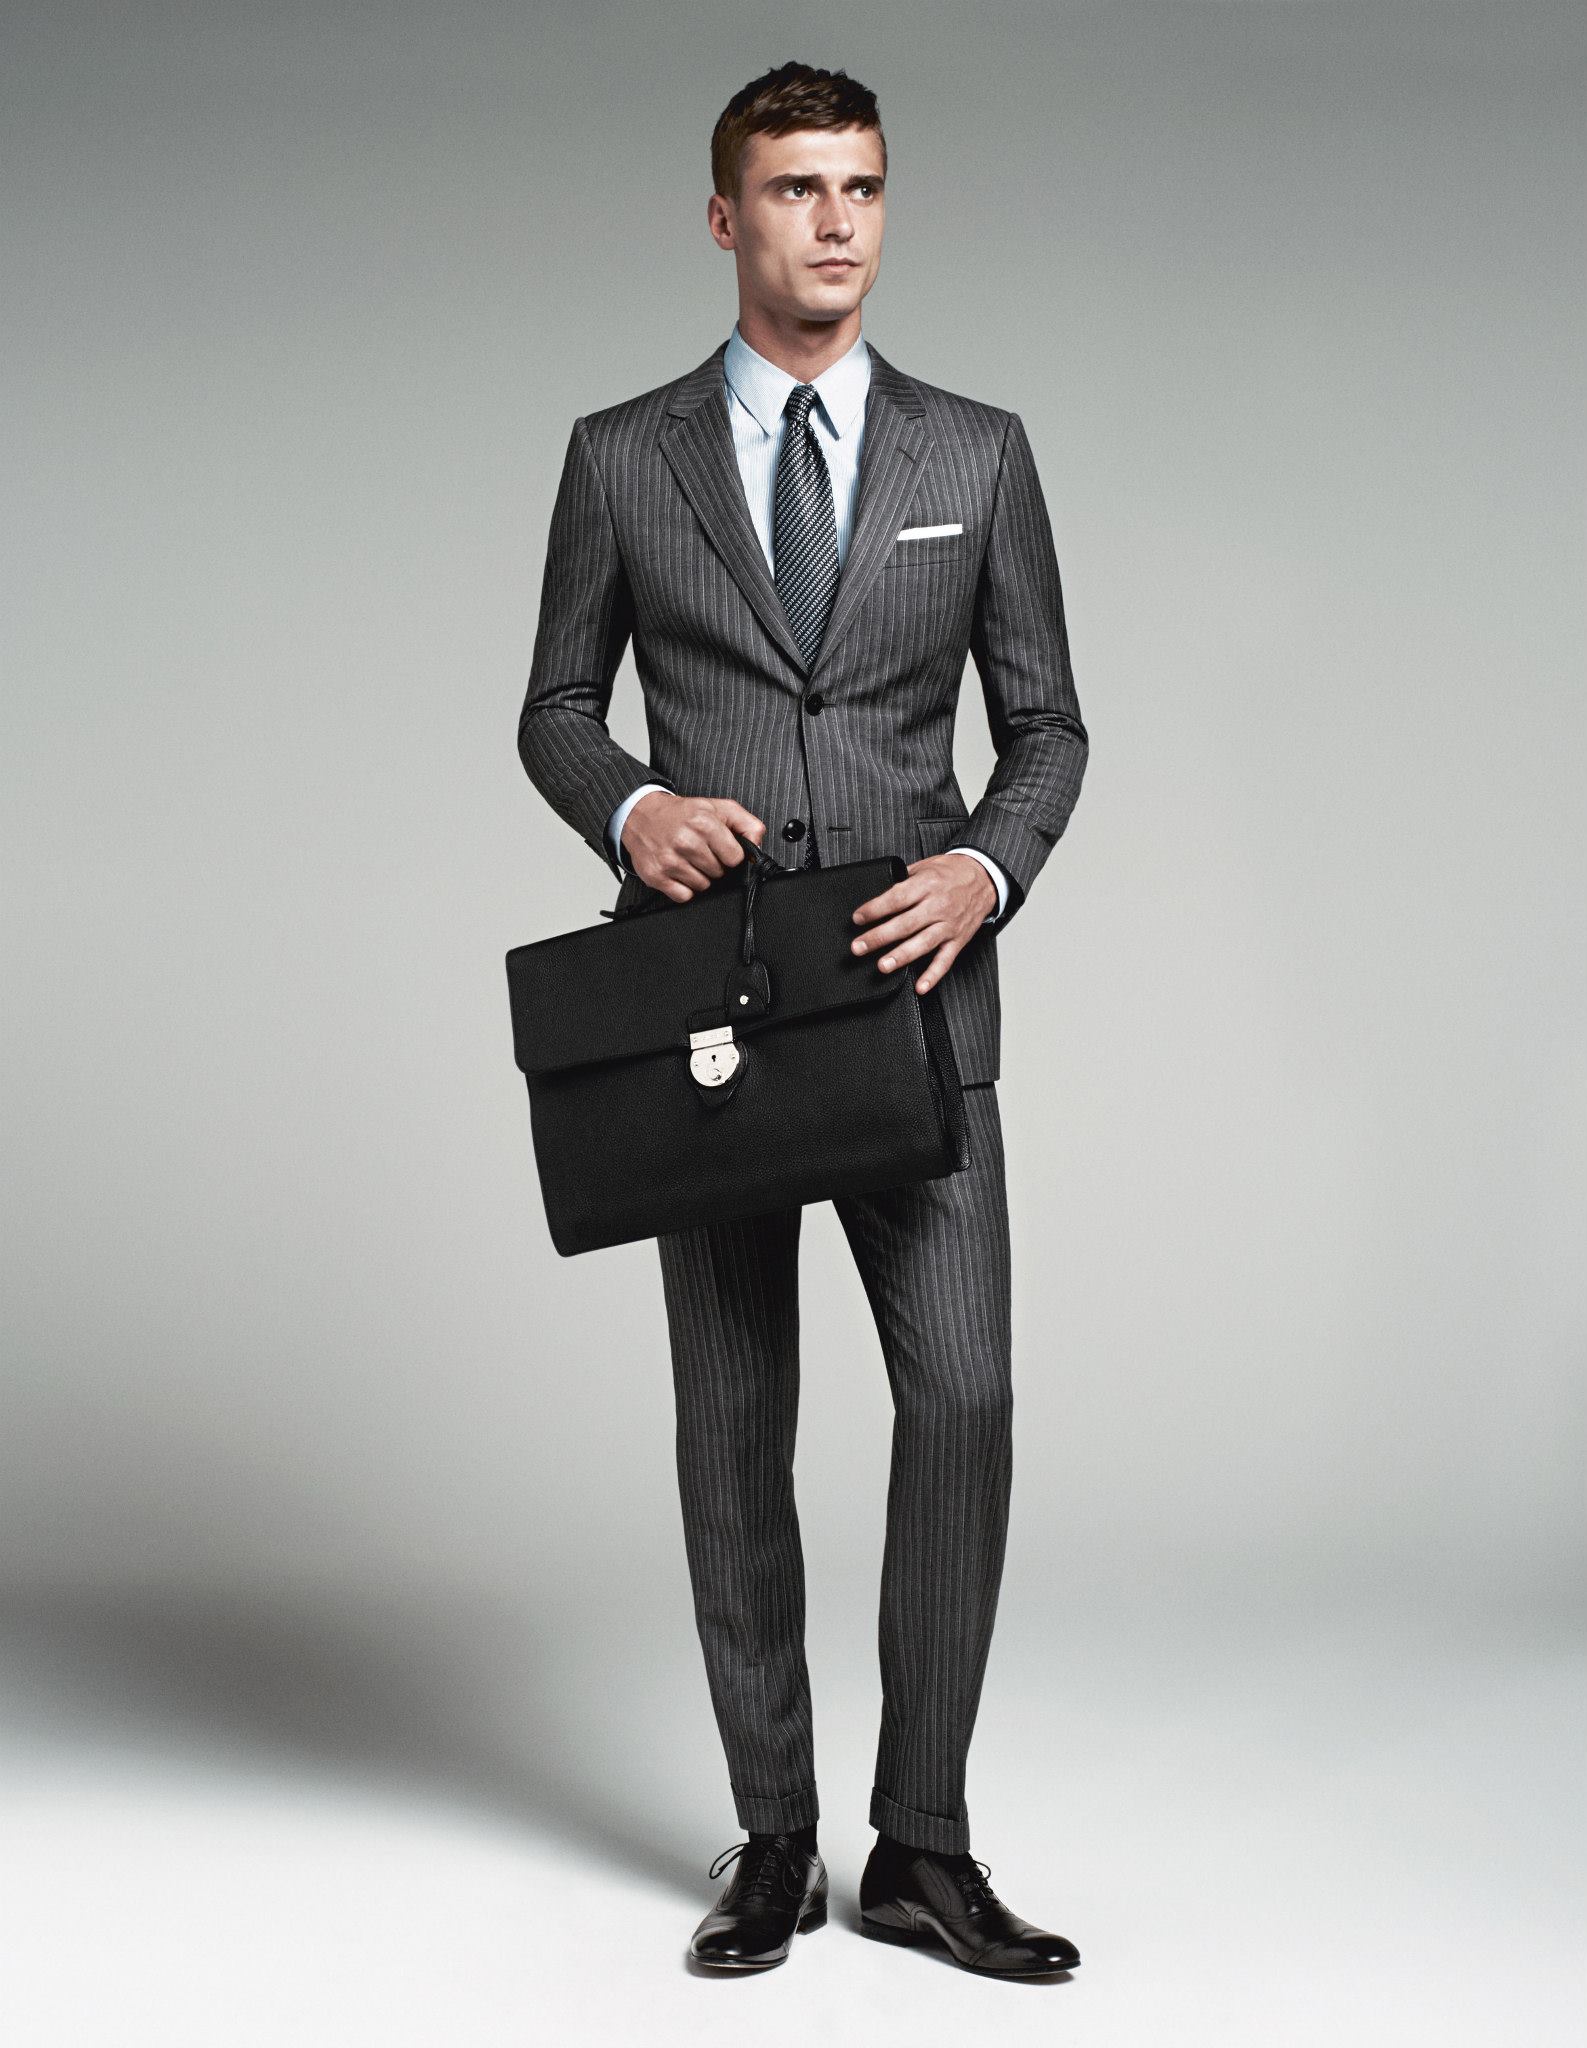 Clement Chabernaud for Gucci Fall 2014 on The Man Has Style